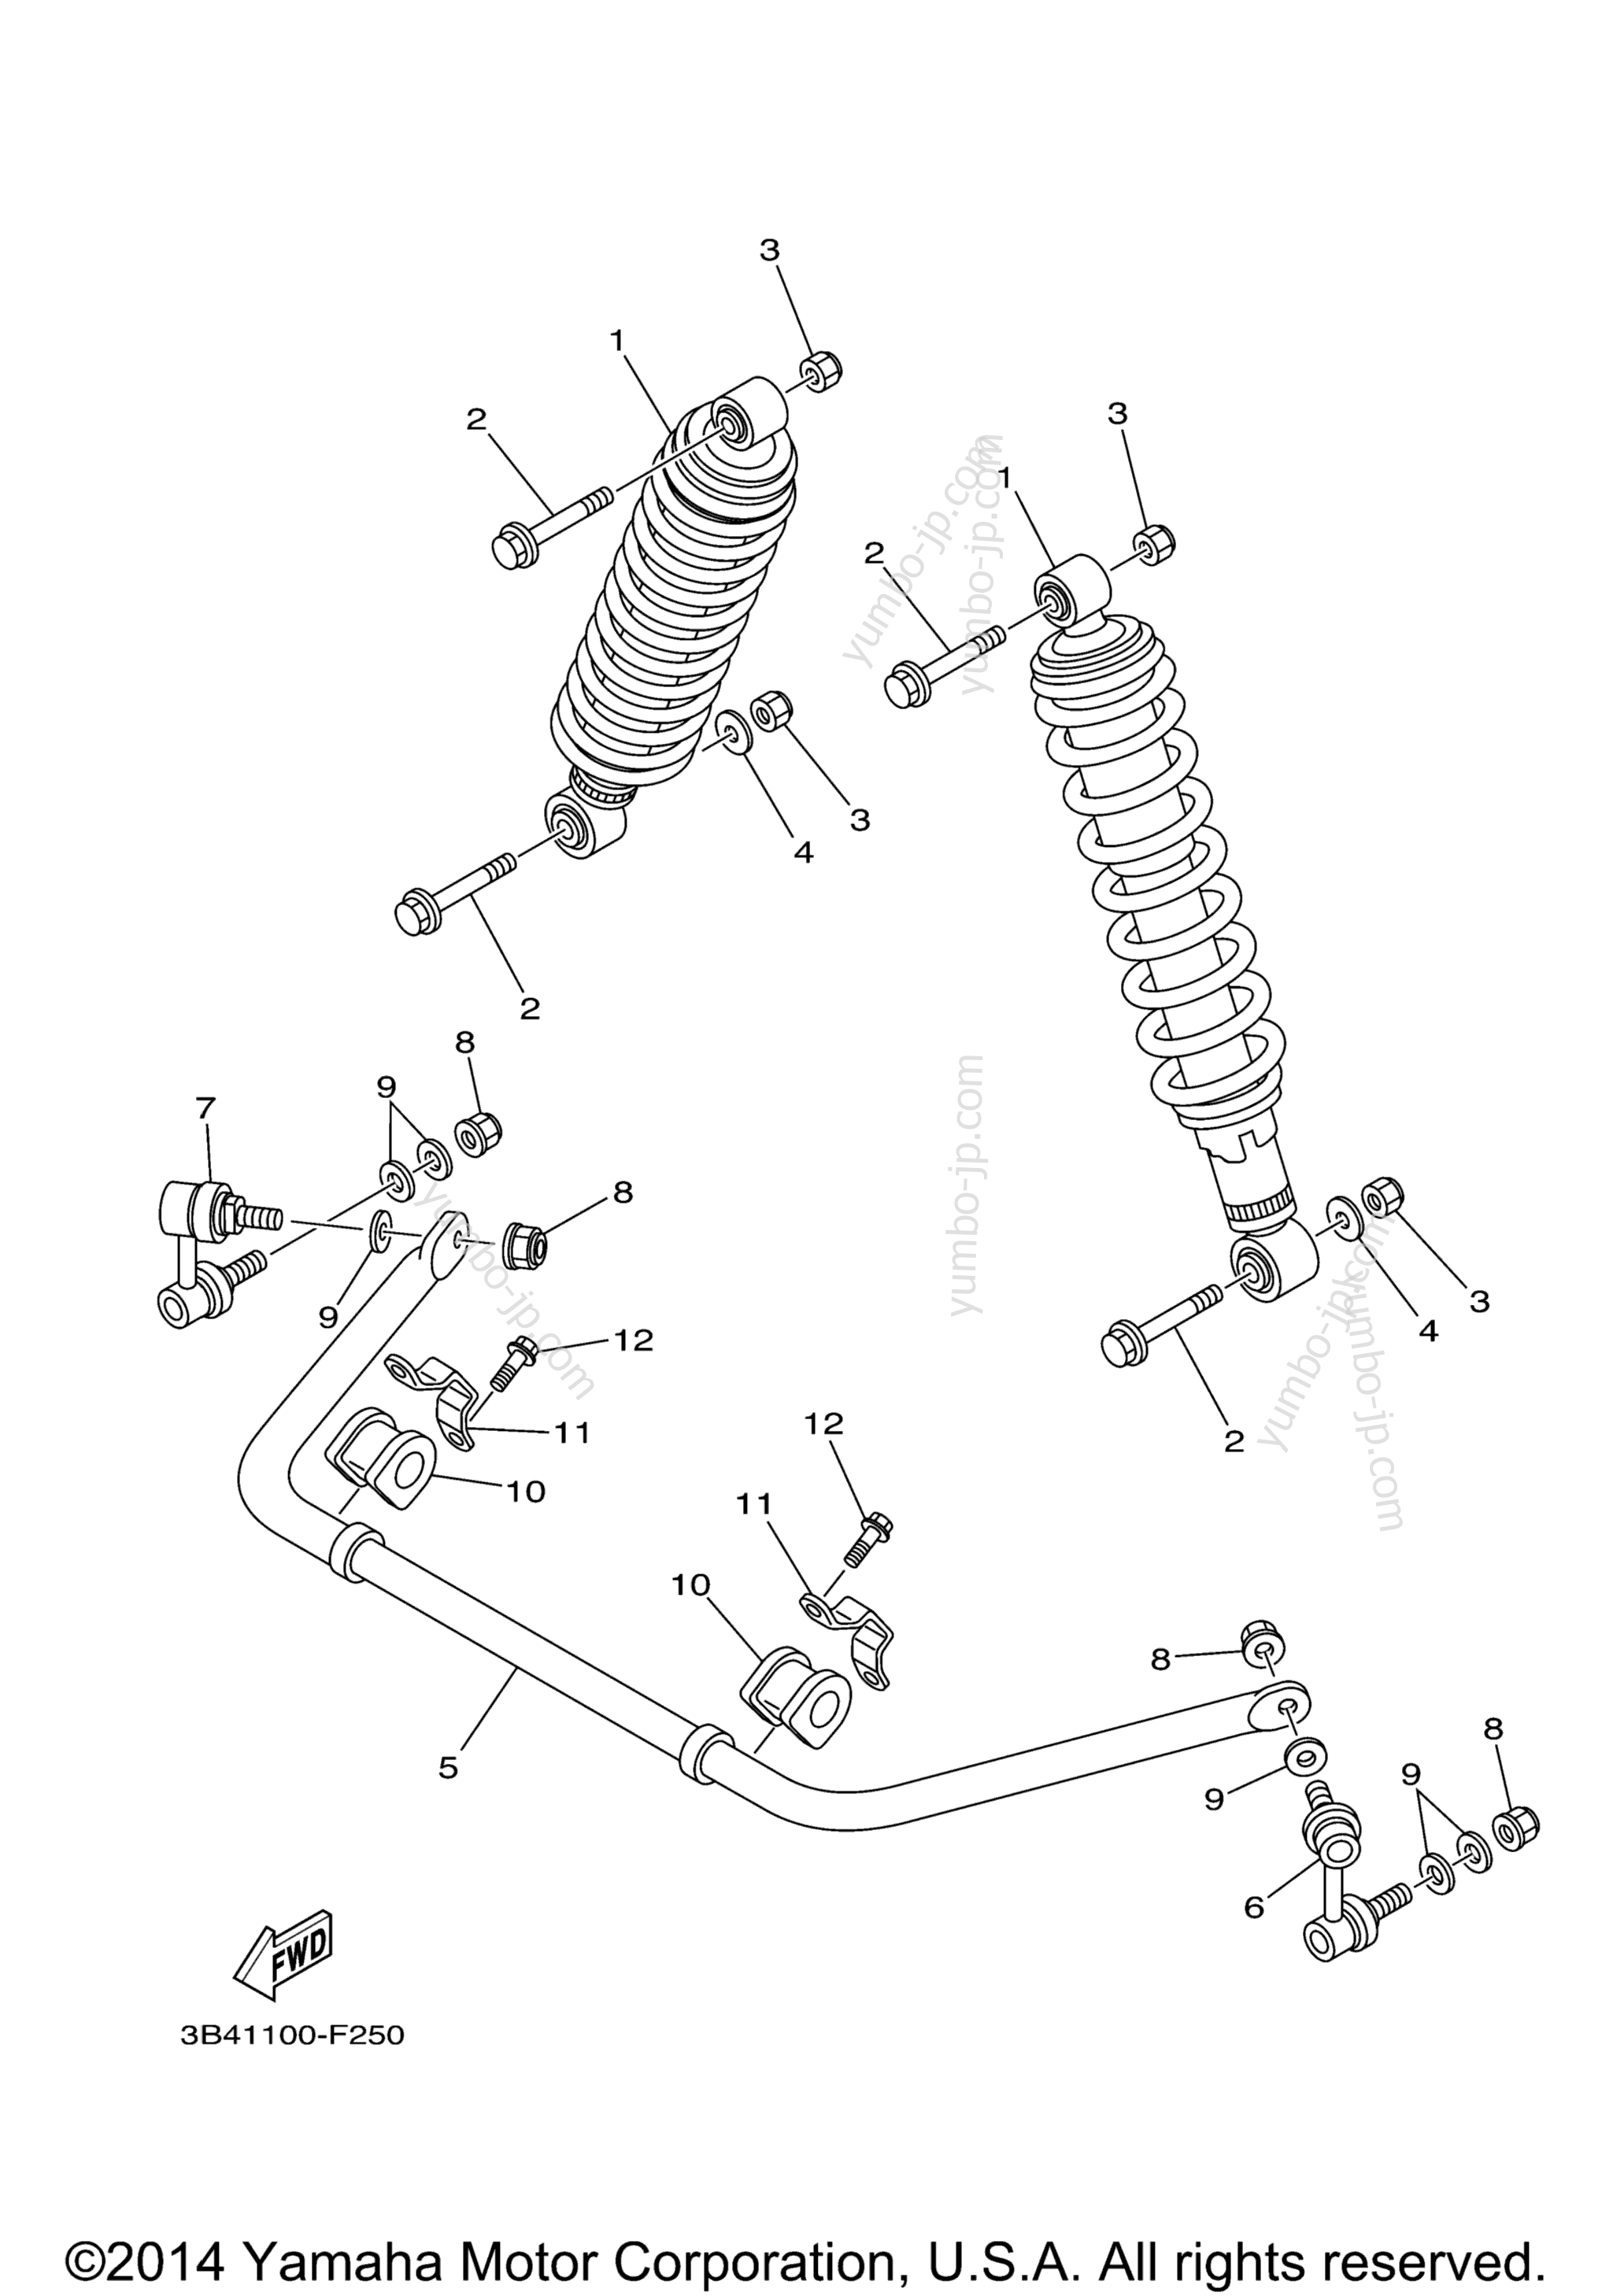 Rear Suspension for ATVs YAMAHA GRIZZLY 700 HUNTER (YFM7FGHA) 2011 year